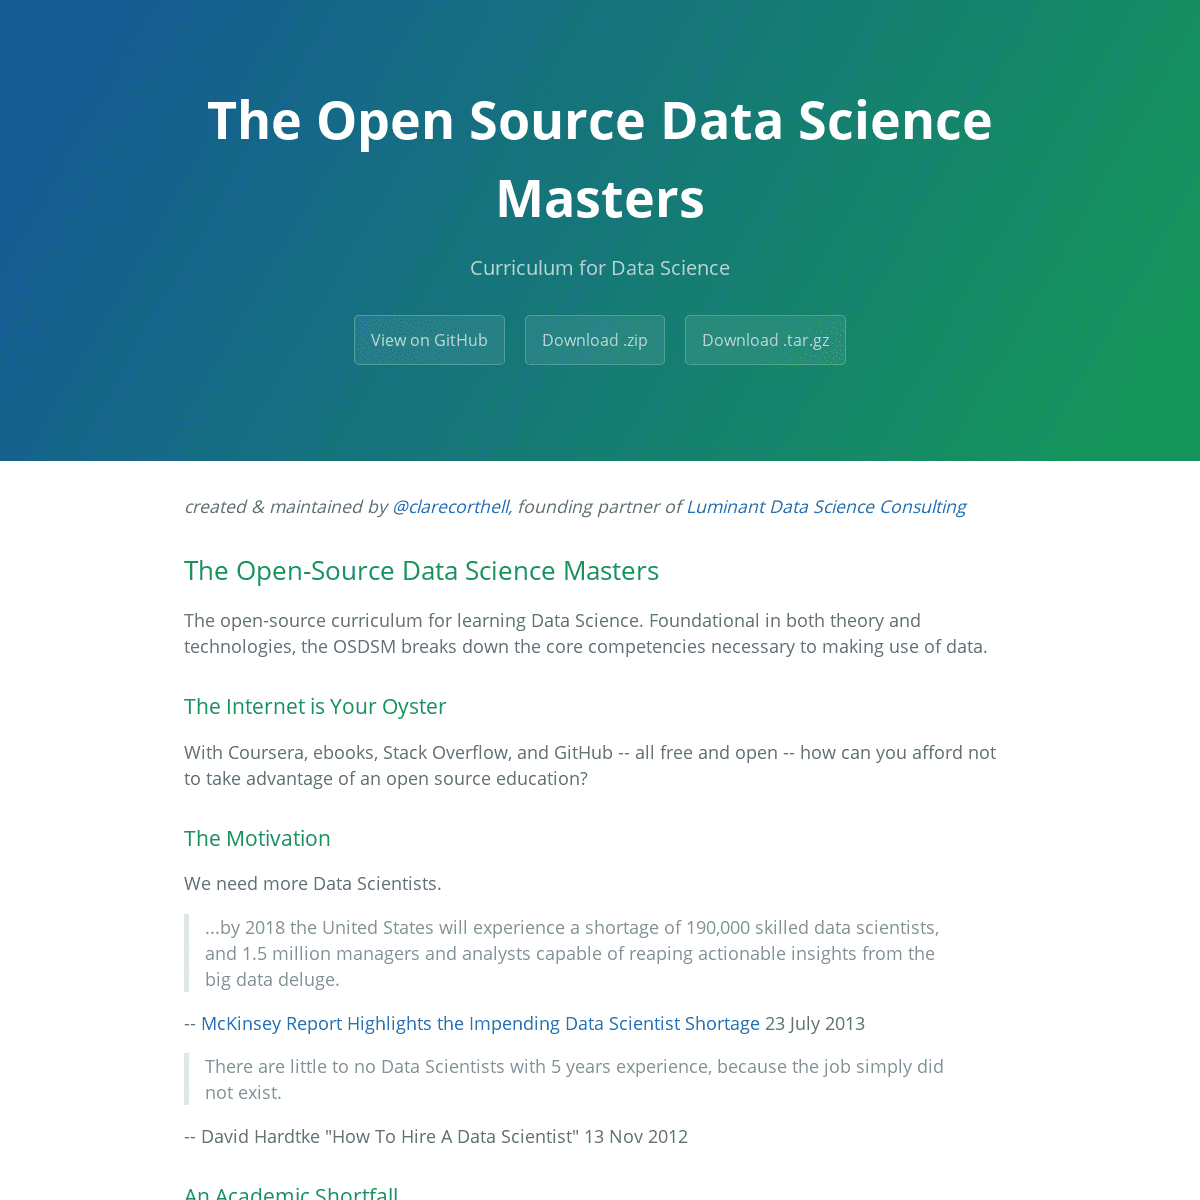 A complete backup of datasciencemasters.org